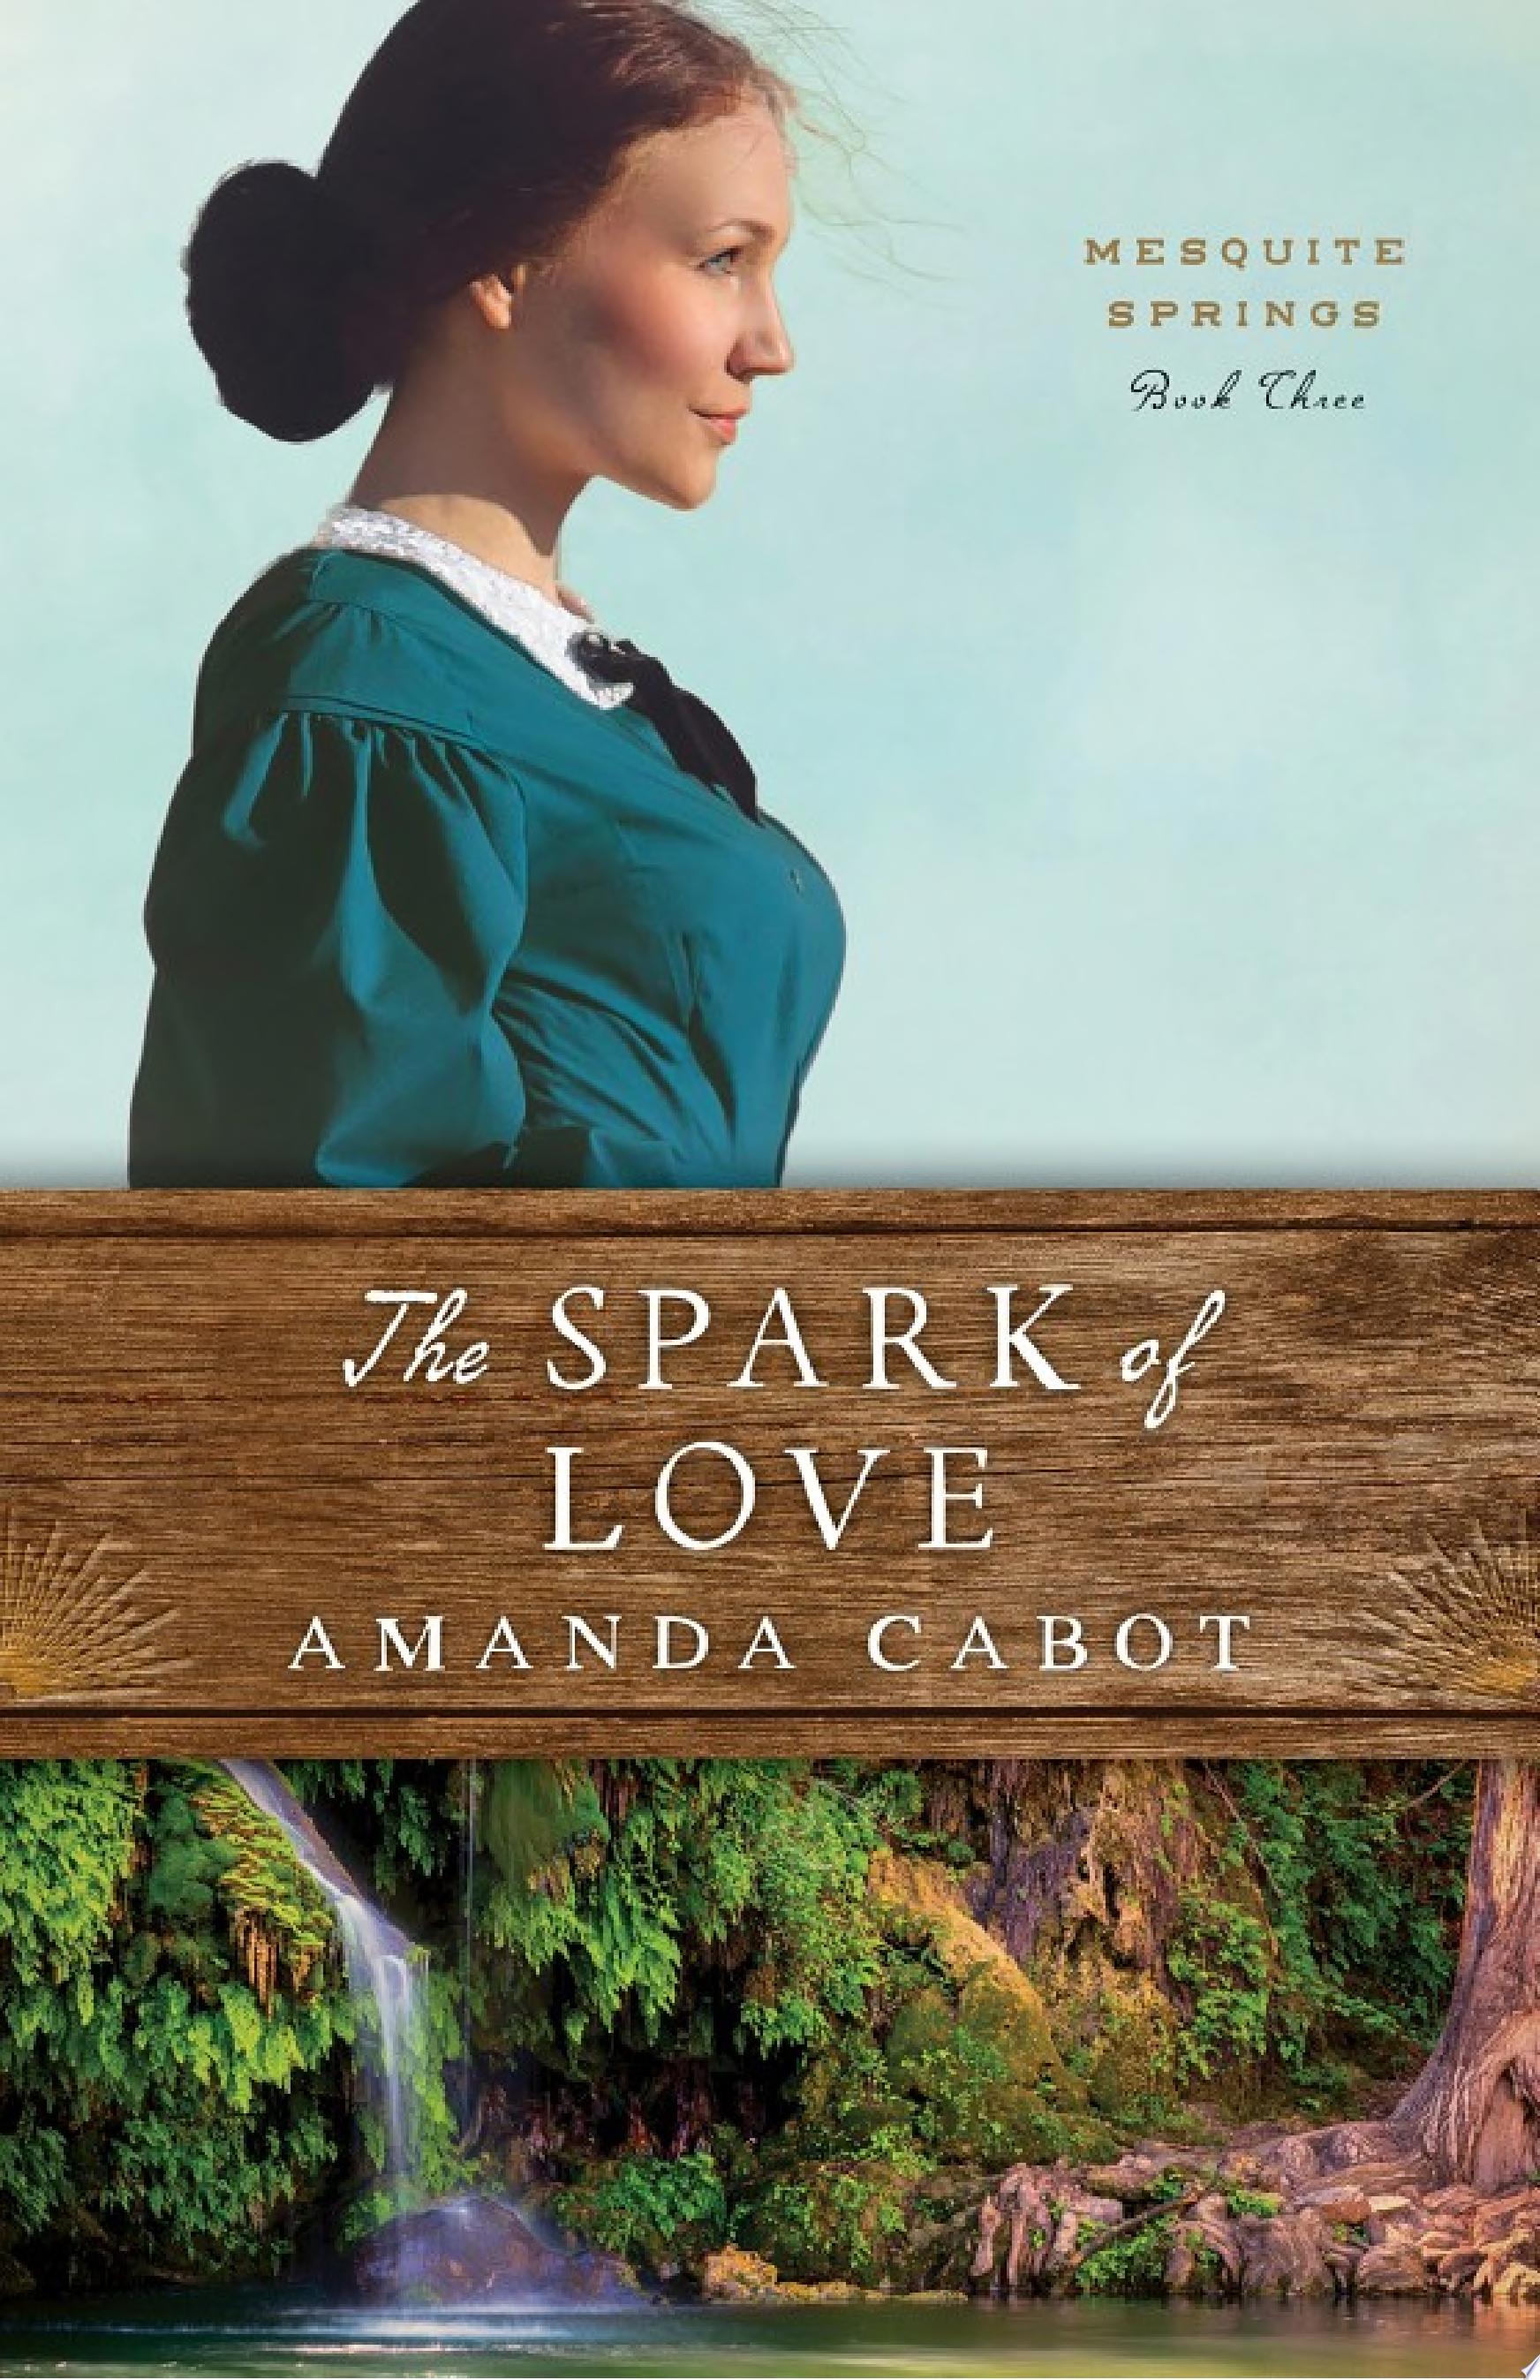 Image for "The Spark of Love (Mesquite Springs Book #3)"